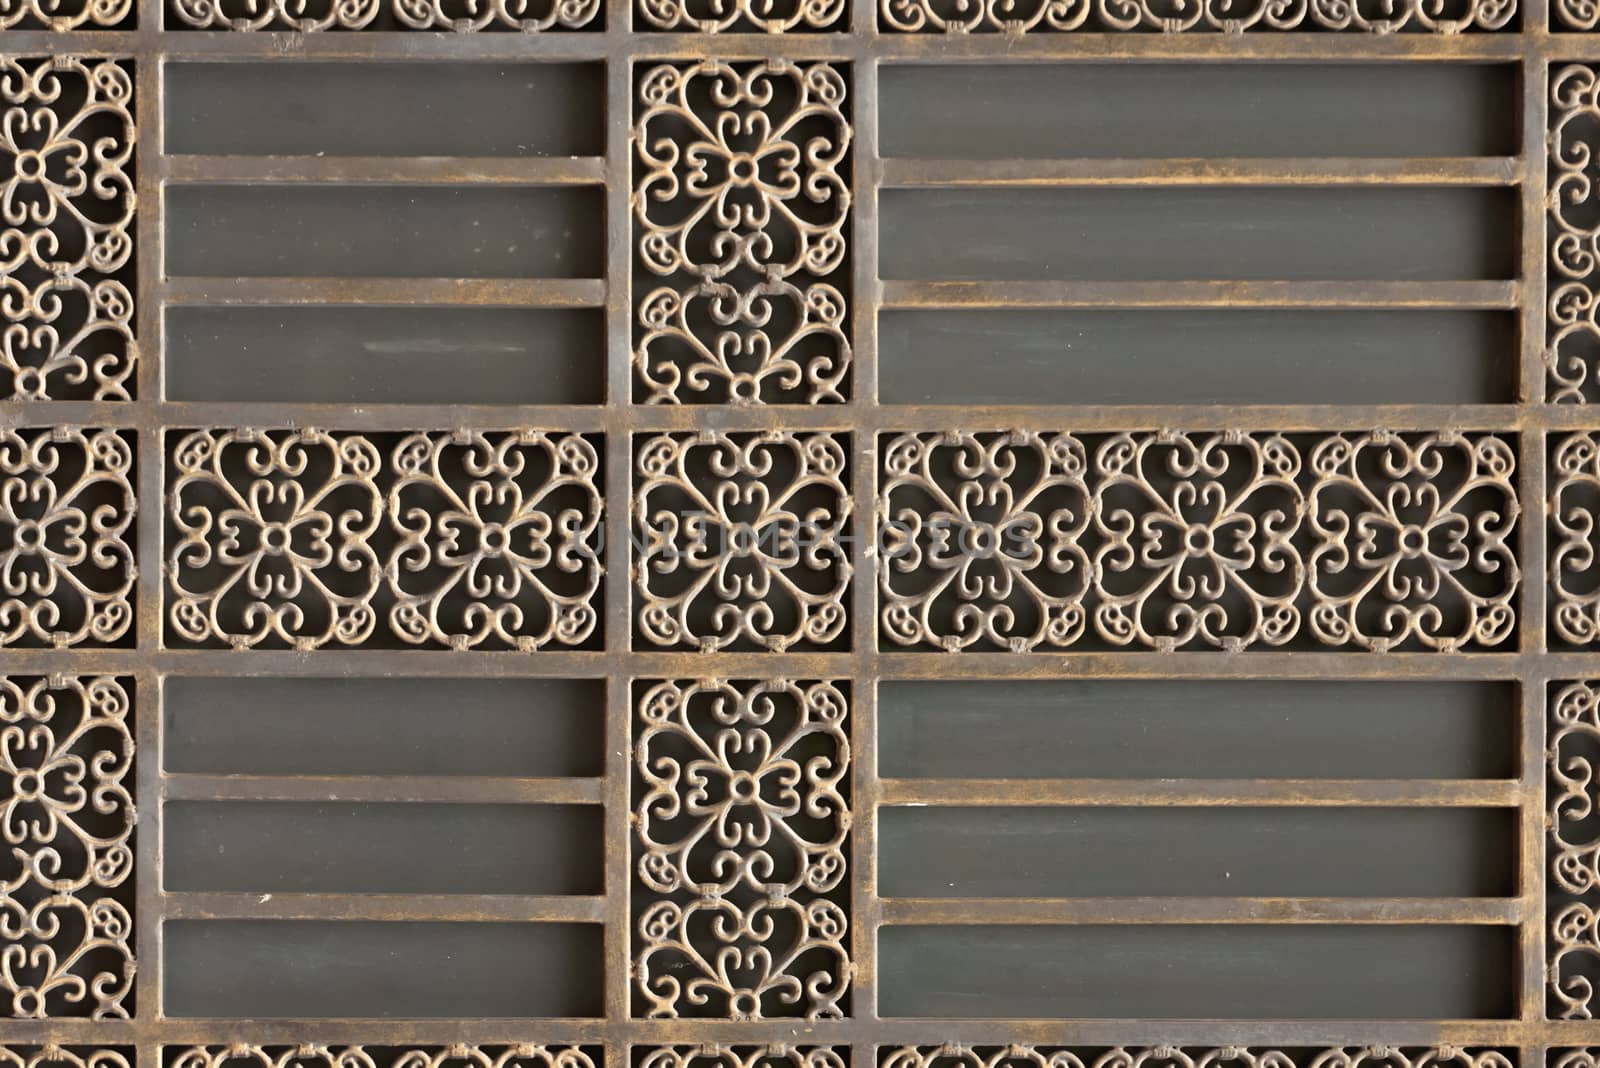 Decorative metal grille. Structure and ornaments of wrought iron